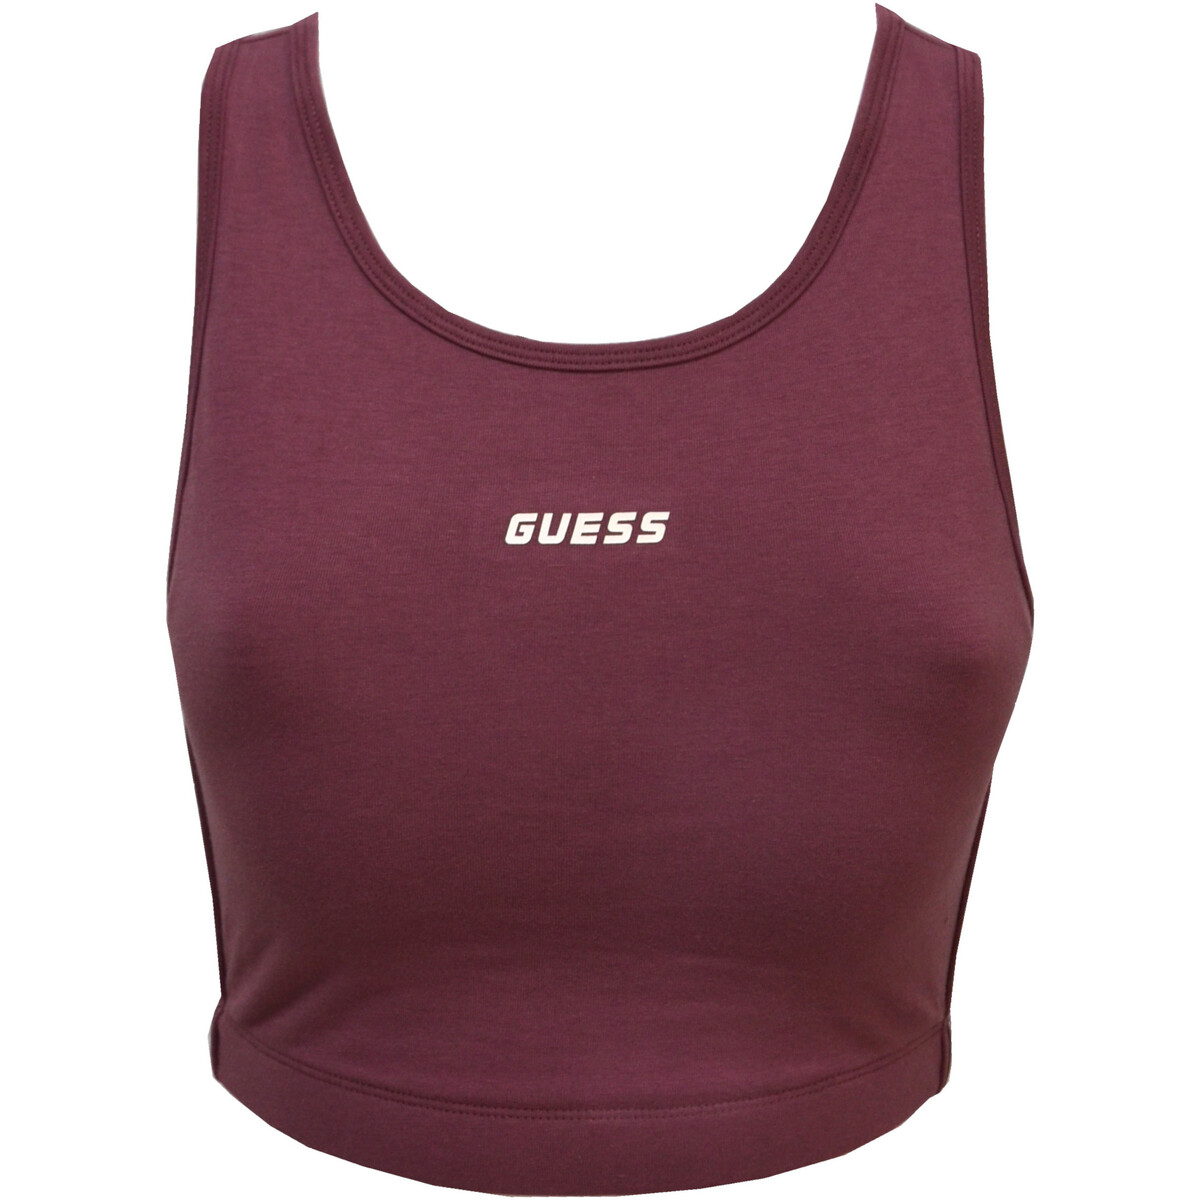 Vêtements Femme guess ss cn andreana tee casual V2YP11KABR0 Rose